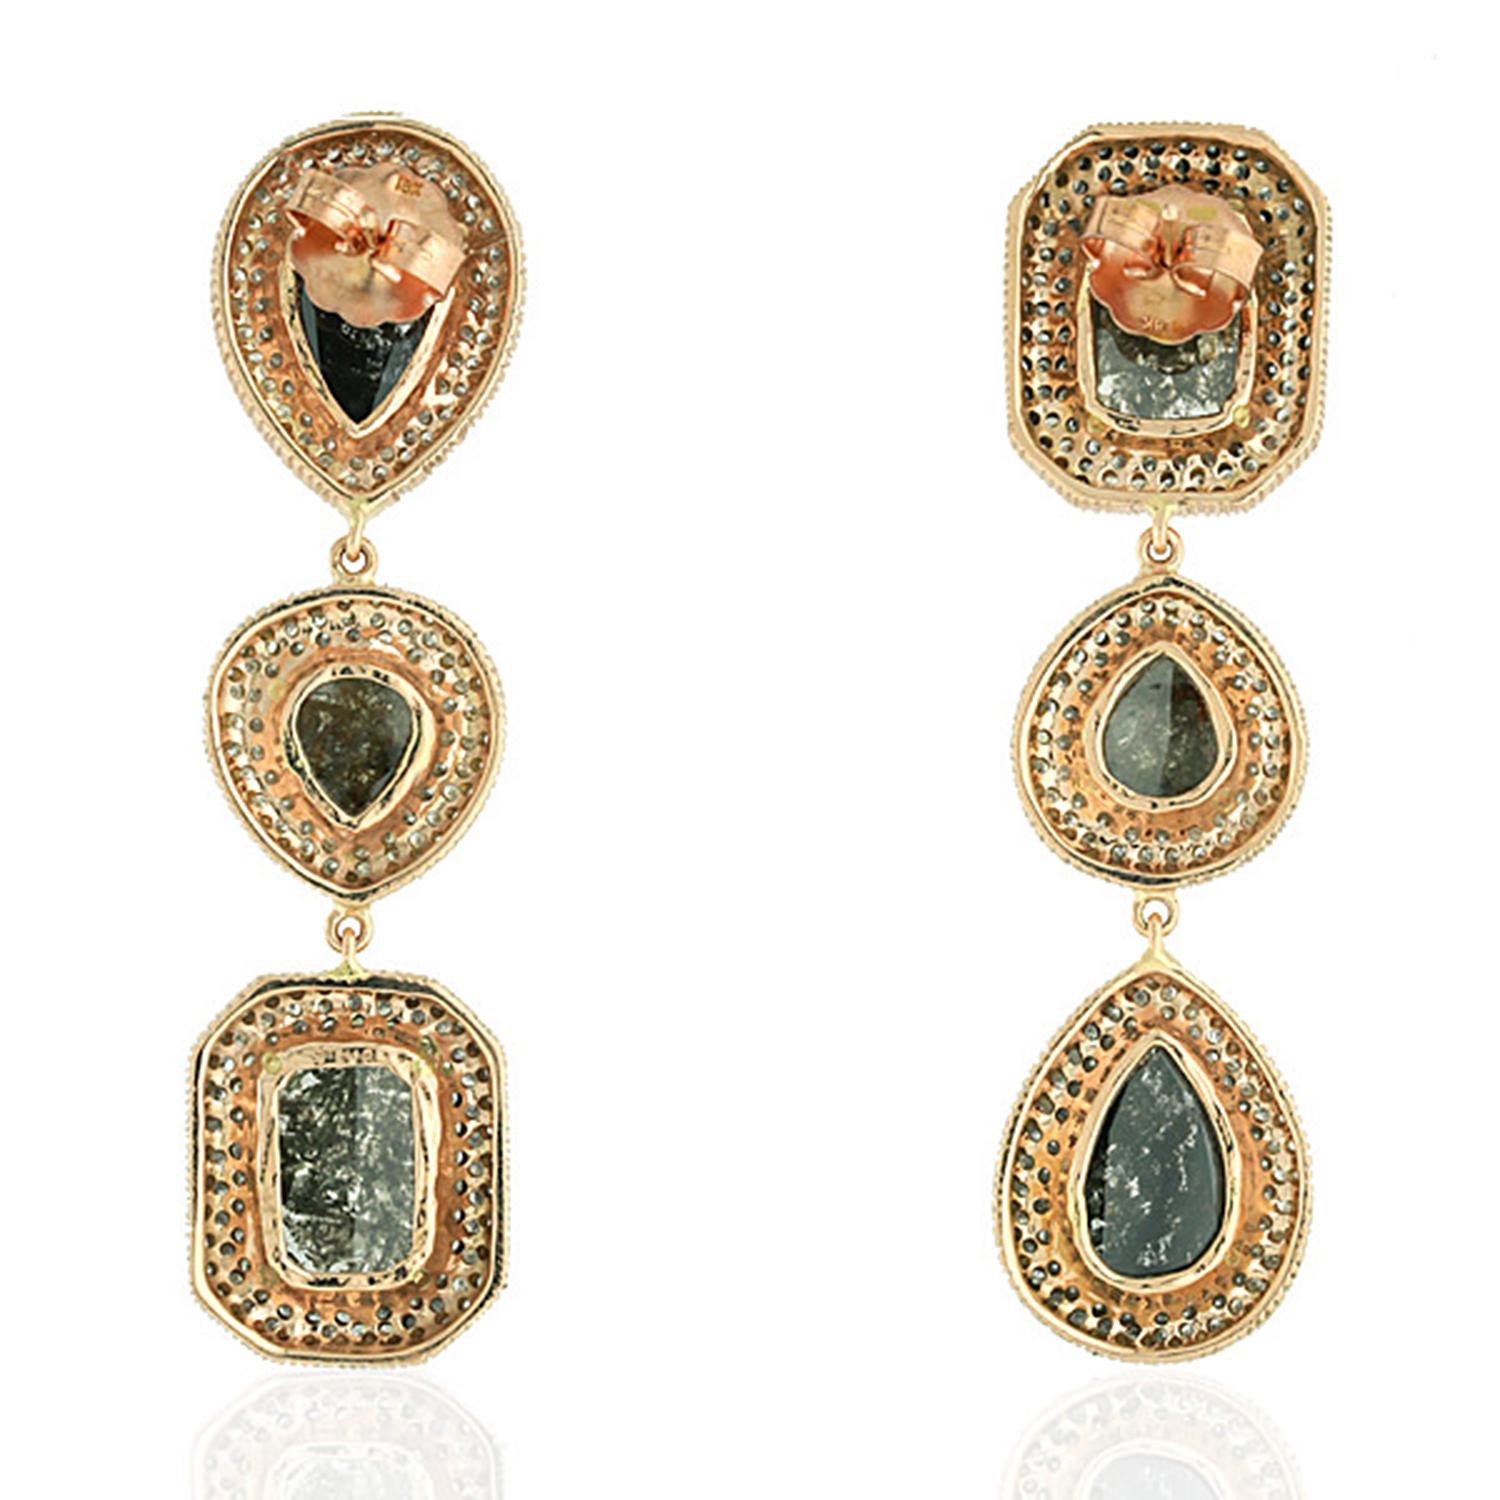 Cast from 14-karat gold, these stunning mismatched earrings are hand set with 20.41 carats of fancy natural diamonds. The rough diamonds are covered in a surface of light-reflecting facets.

FOLLOW  MEGHNA JEWELS storefront to view the latest